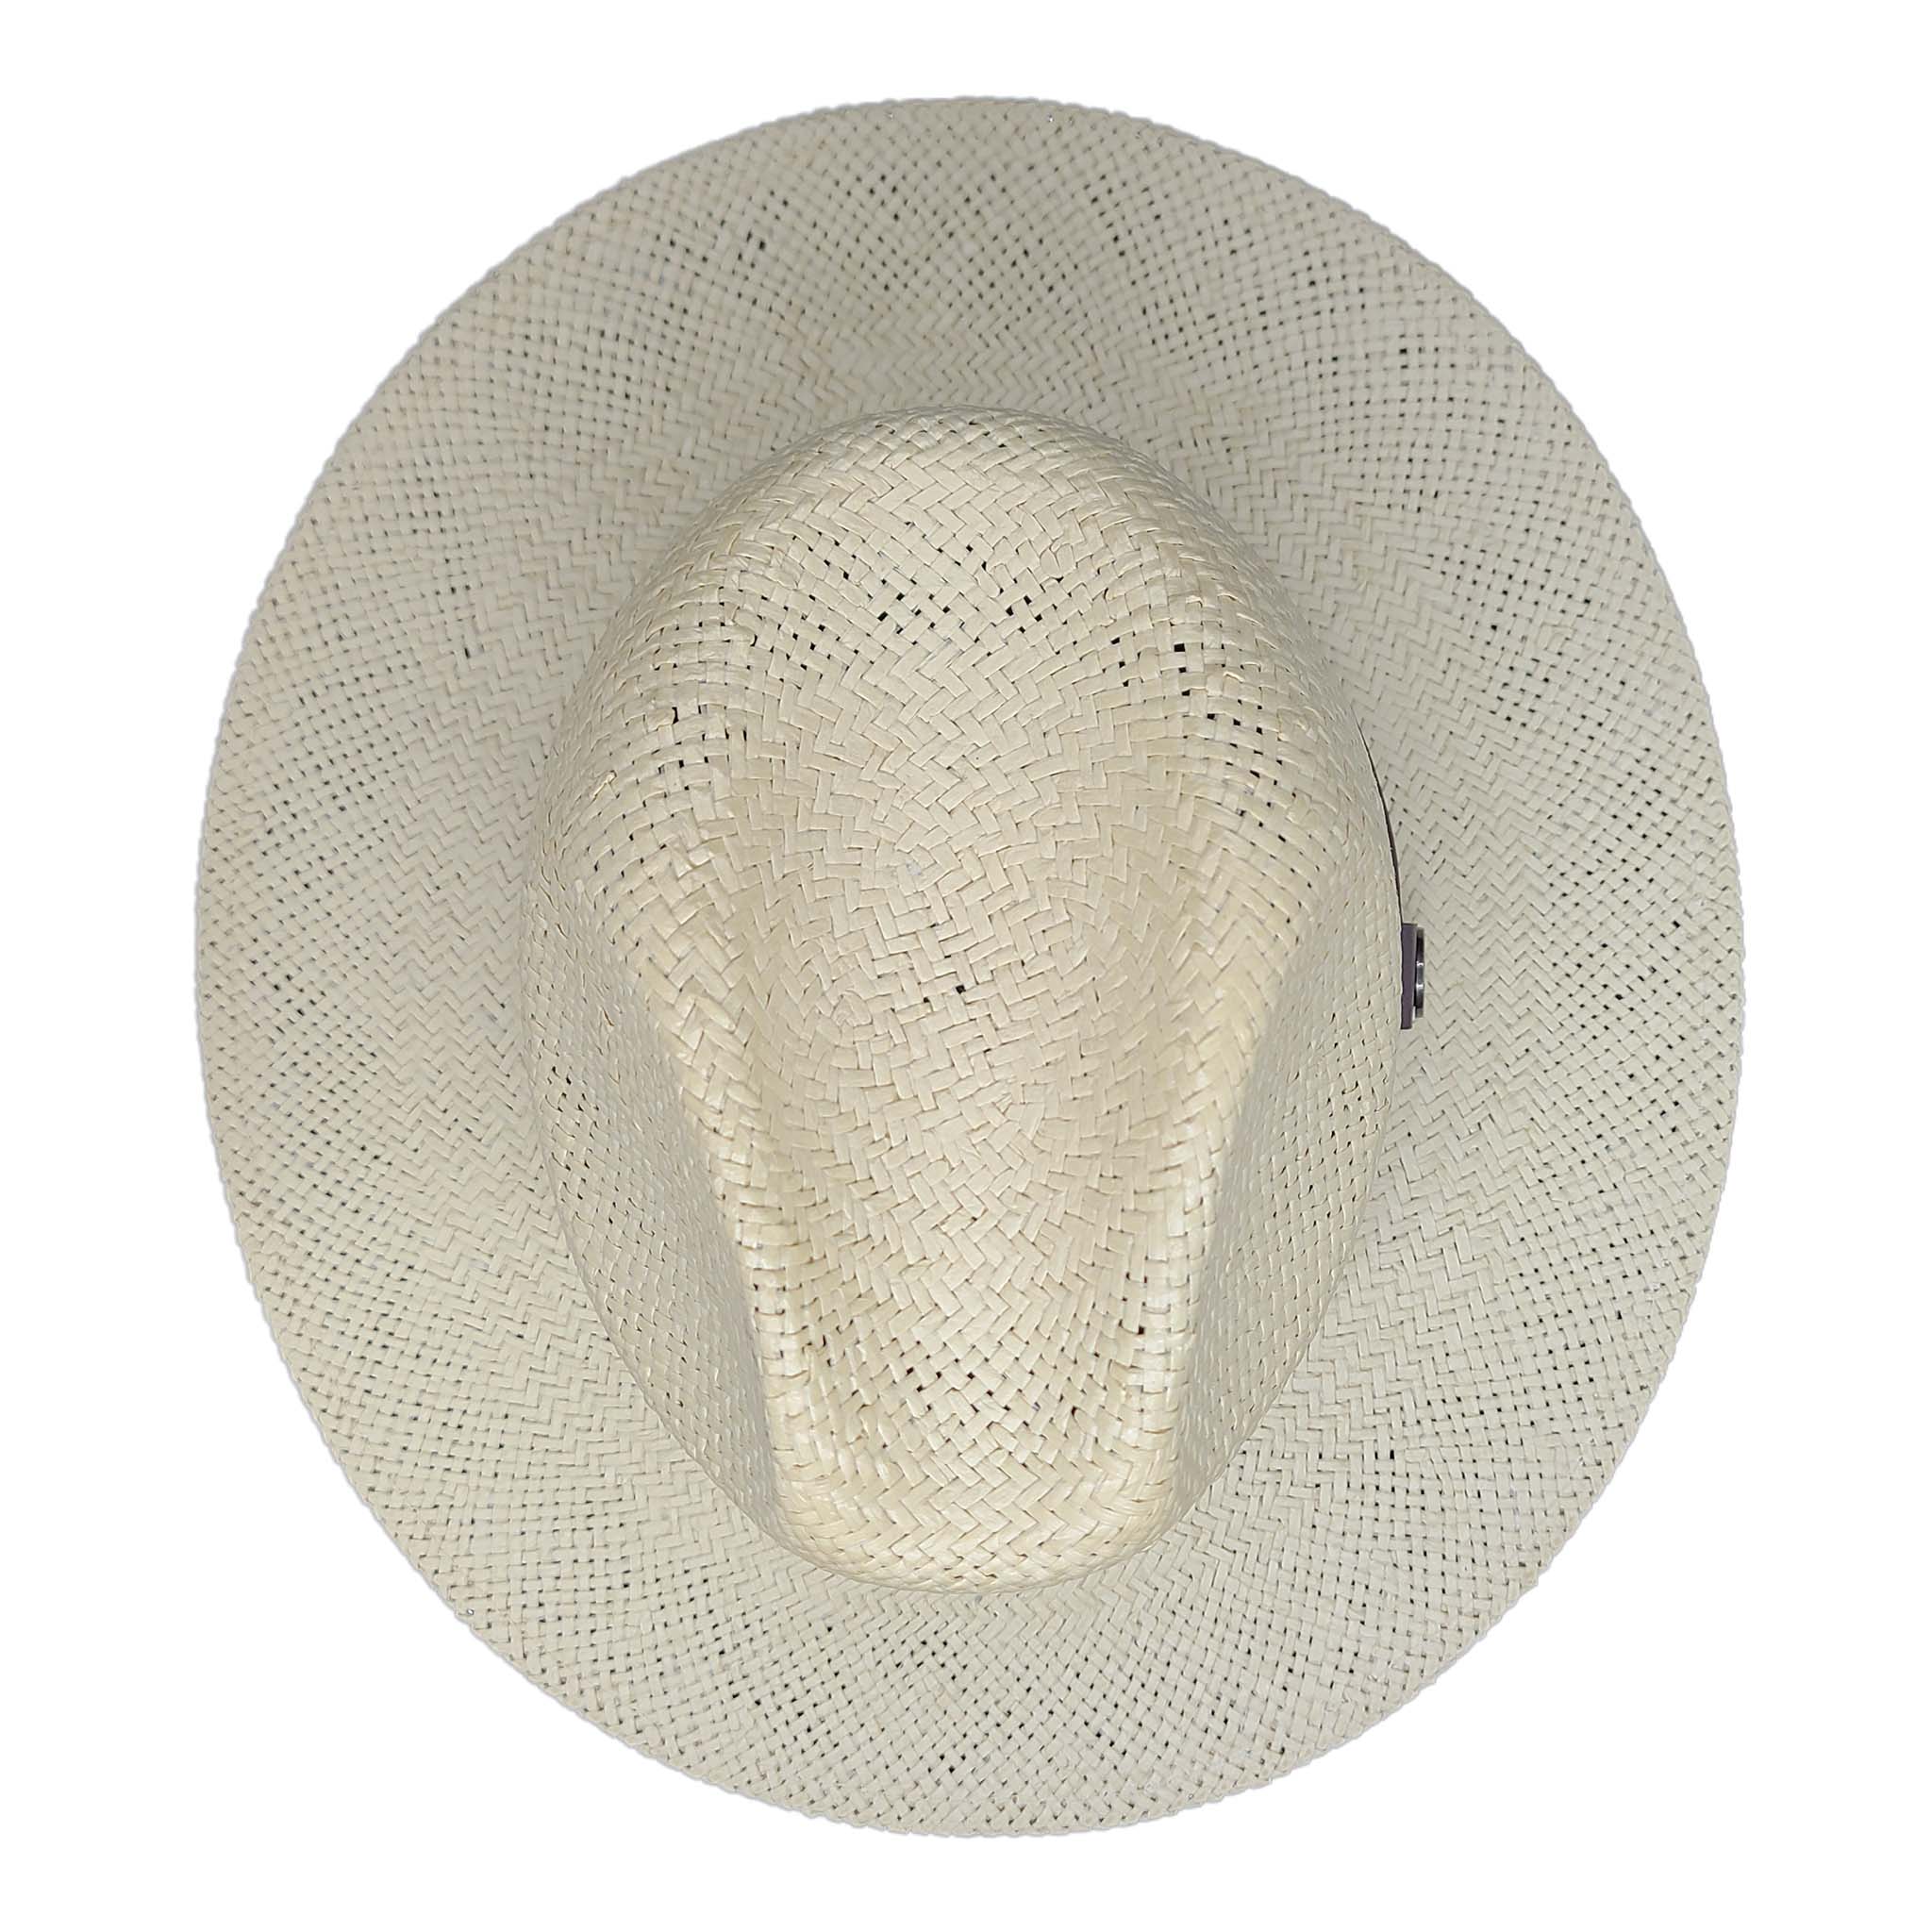 Natural Fedora Style Straw Hat - Full Top View